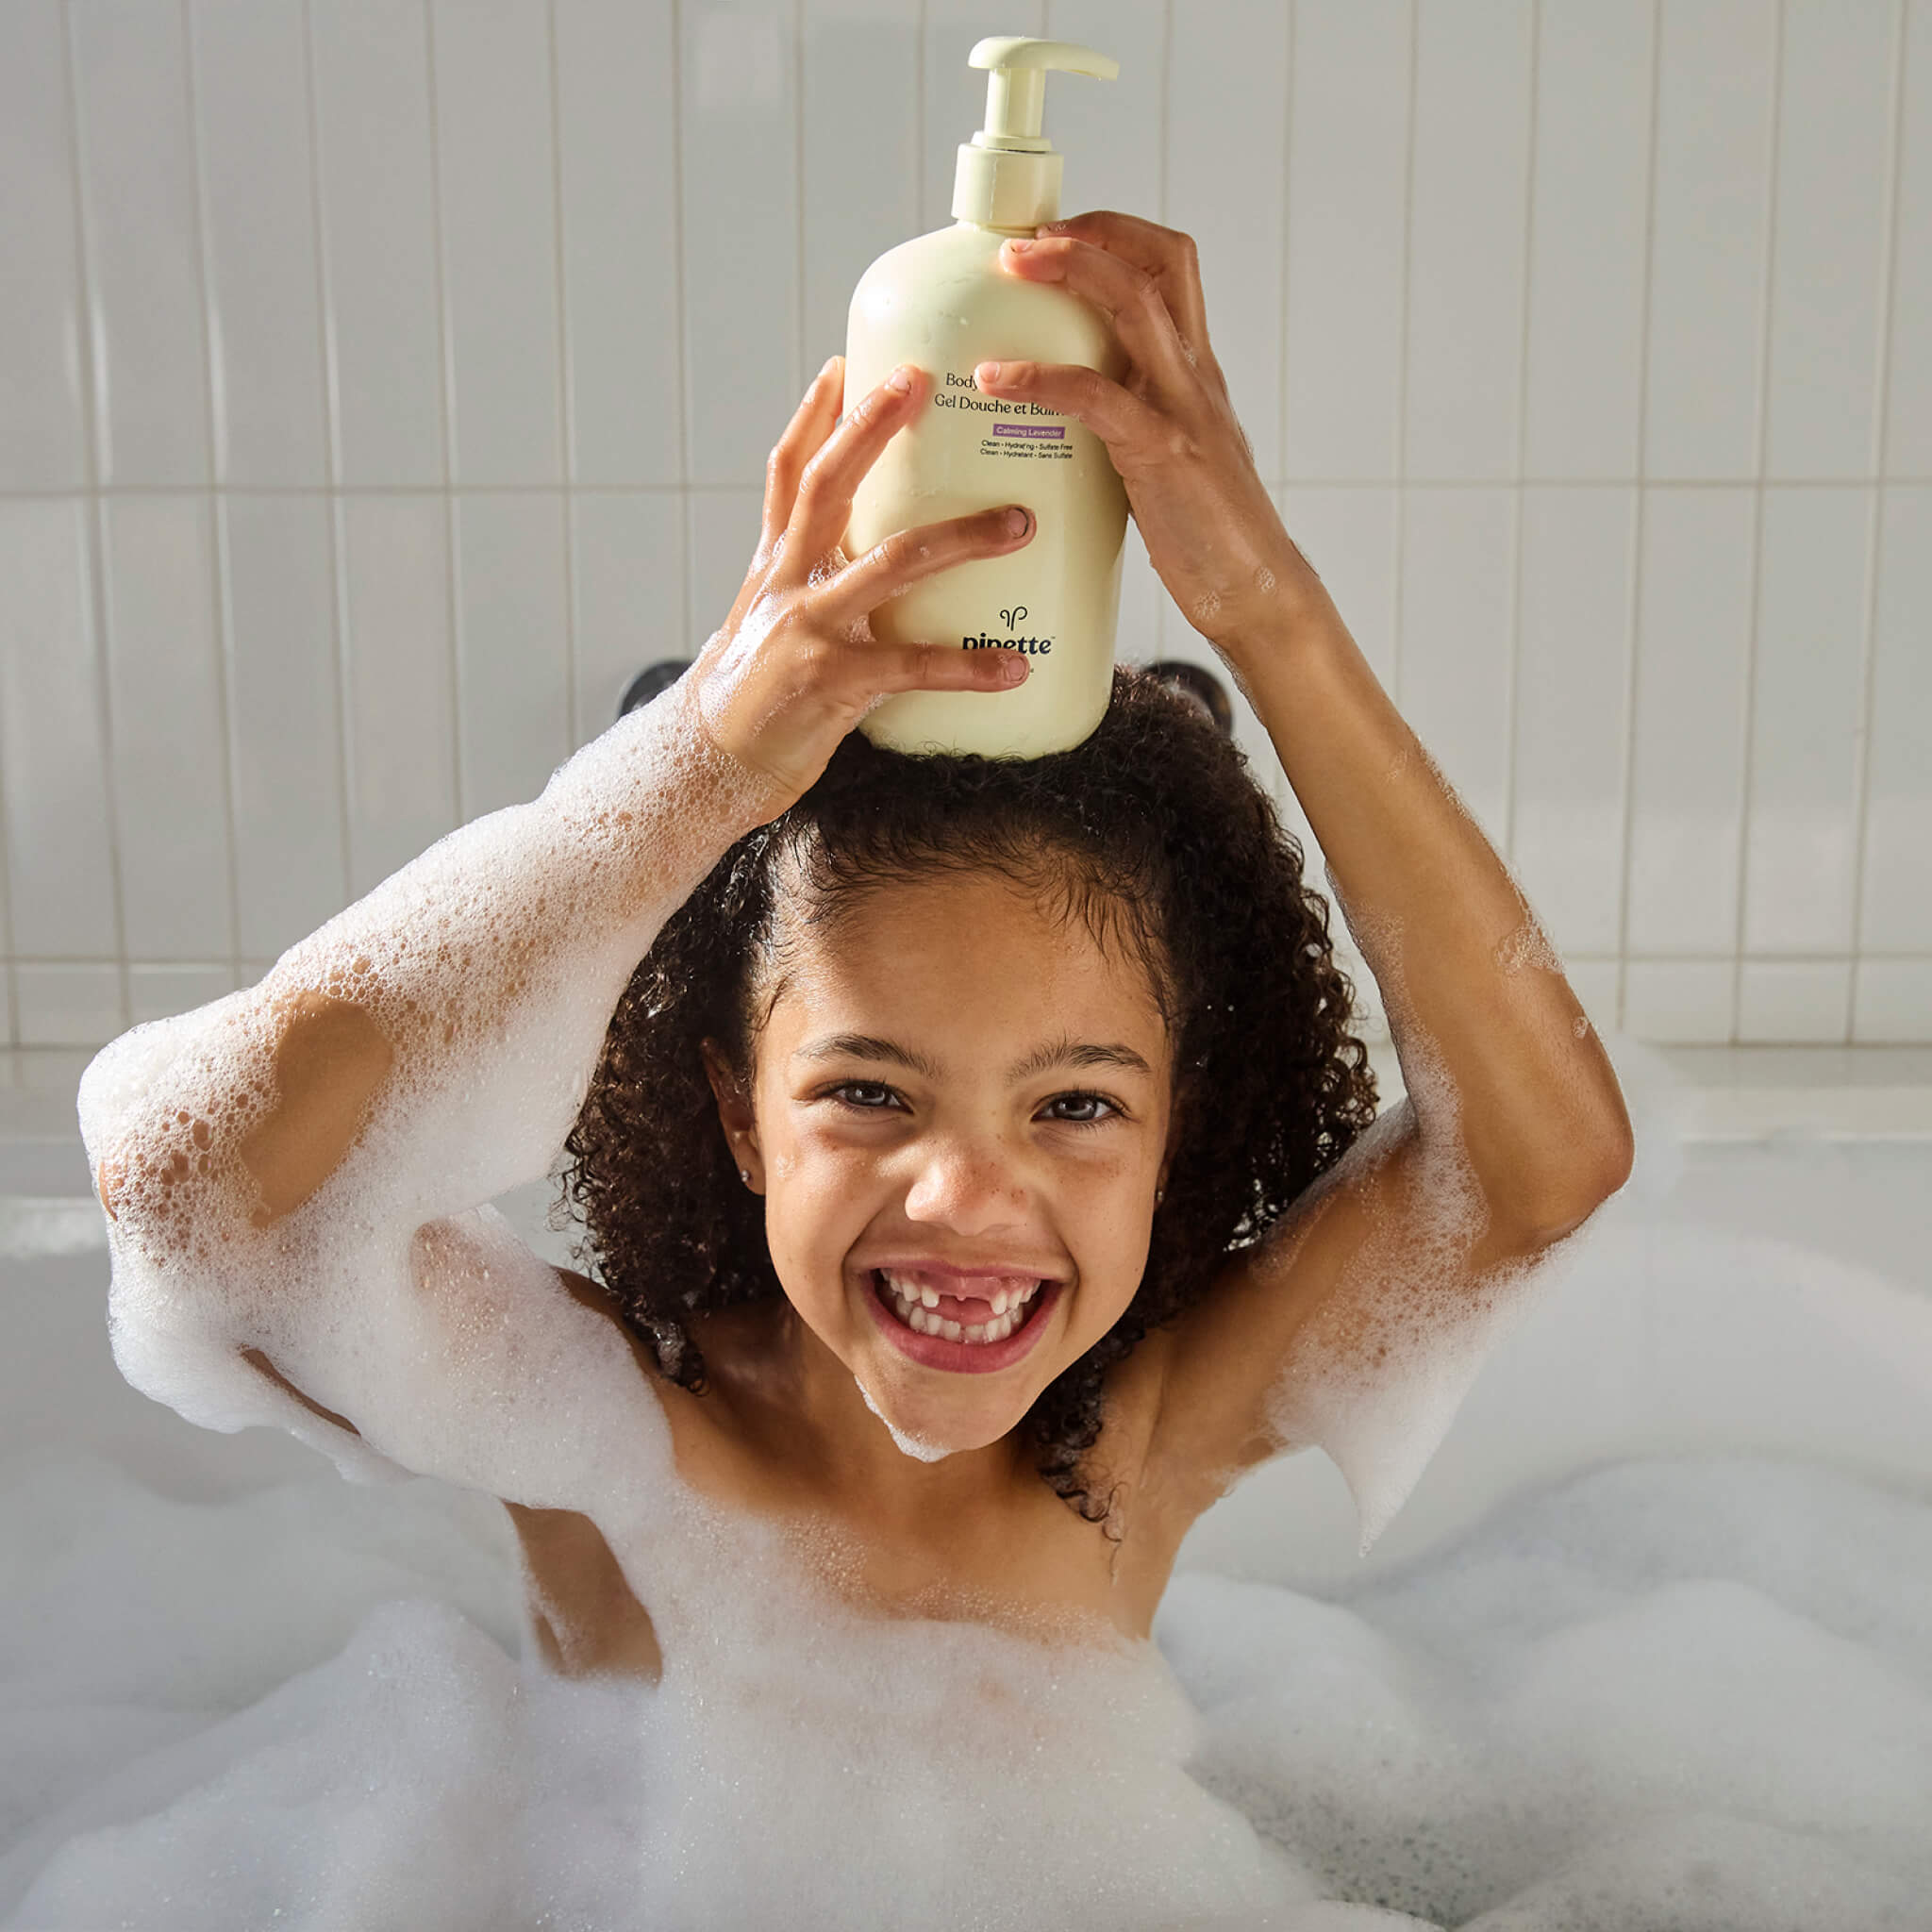 kid using bubble bath by pipette baby